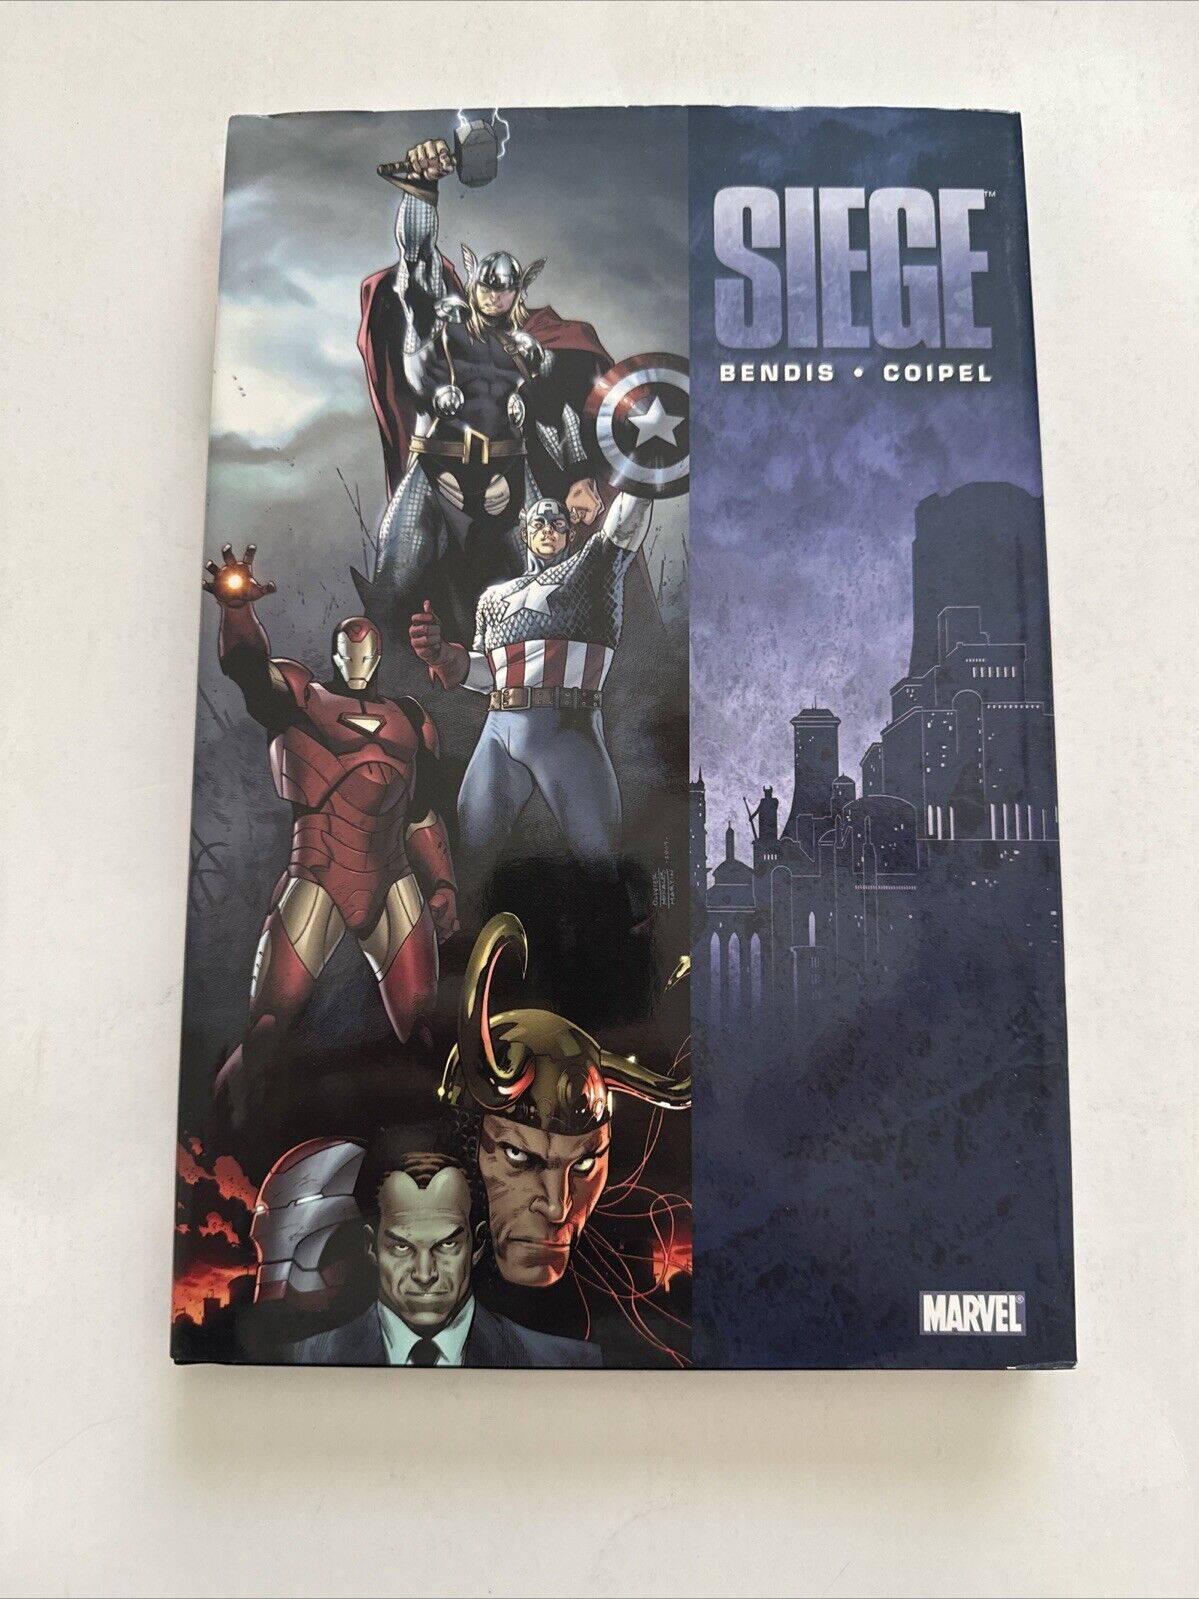 Siege by Brian Michael Bendis & Olivier Coipel (Hardcover, Marvel) Graphic Novel